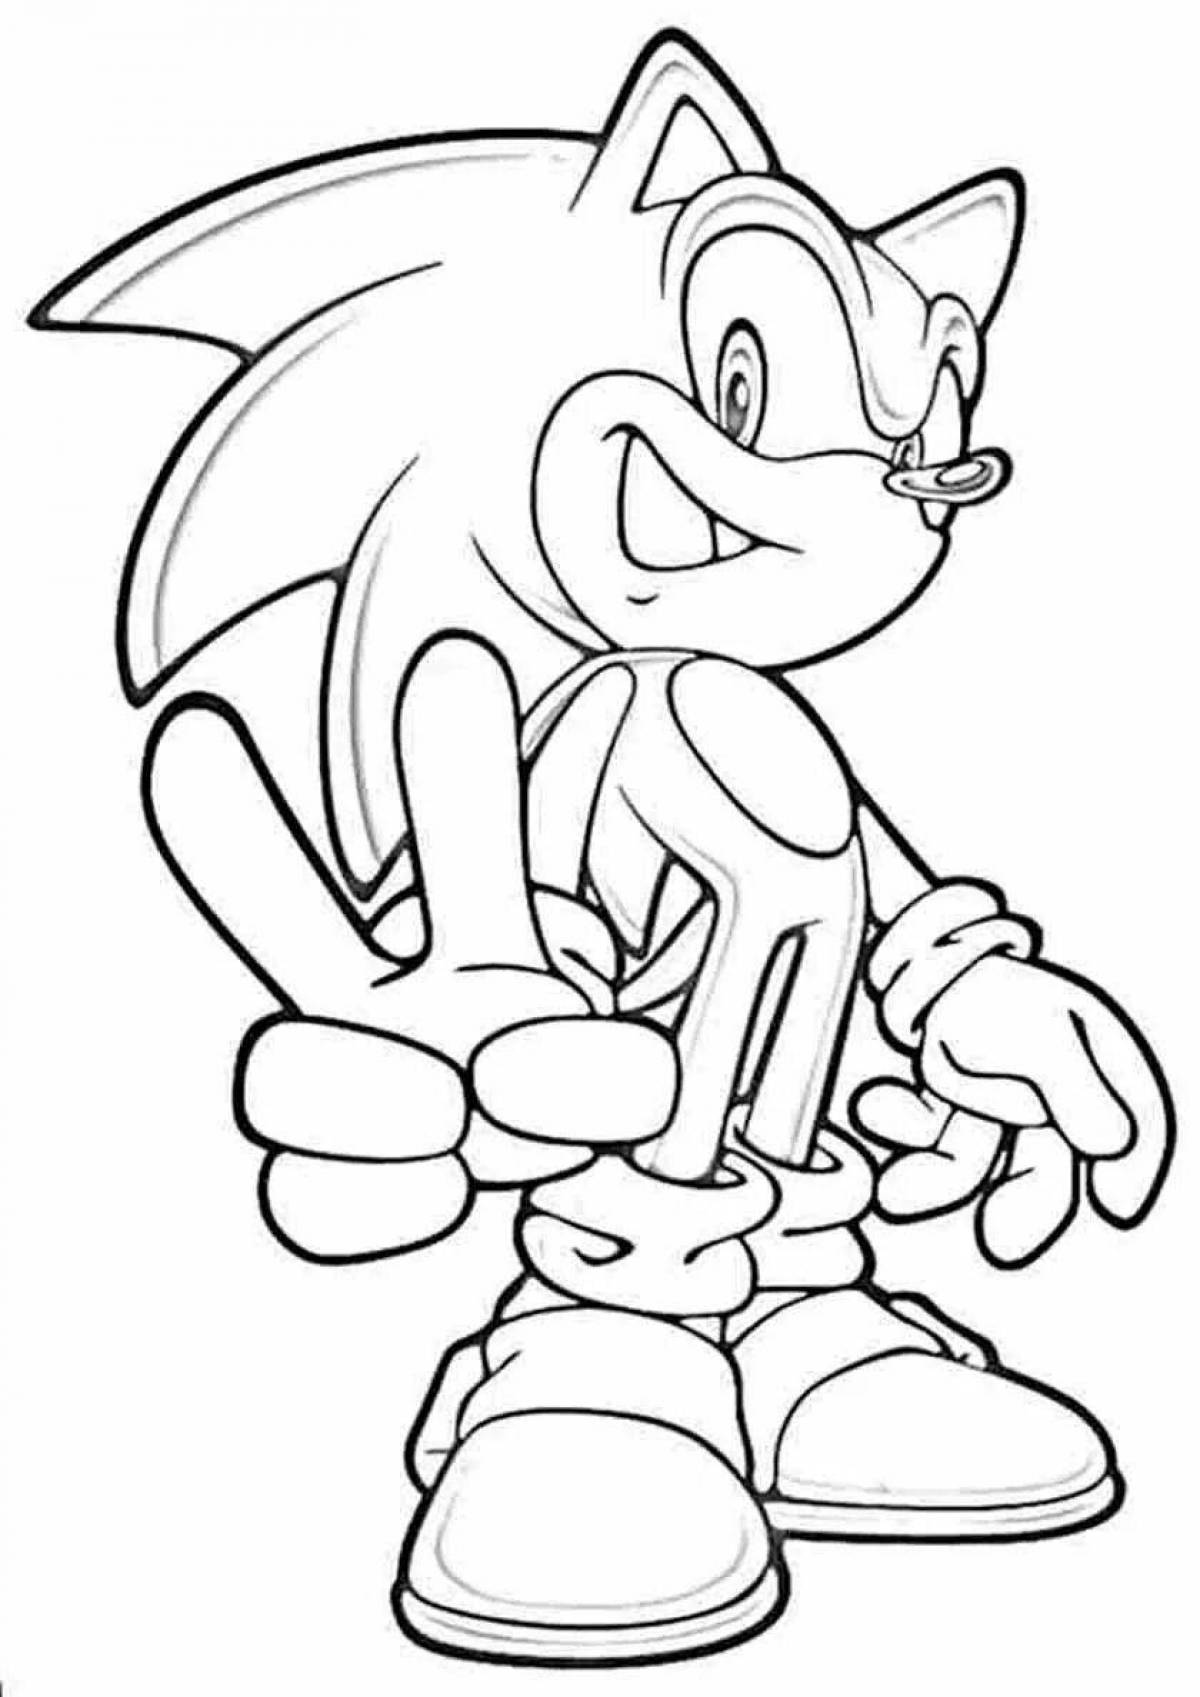 Cute sonic x z coloring book